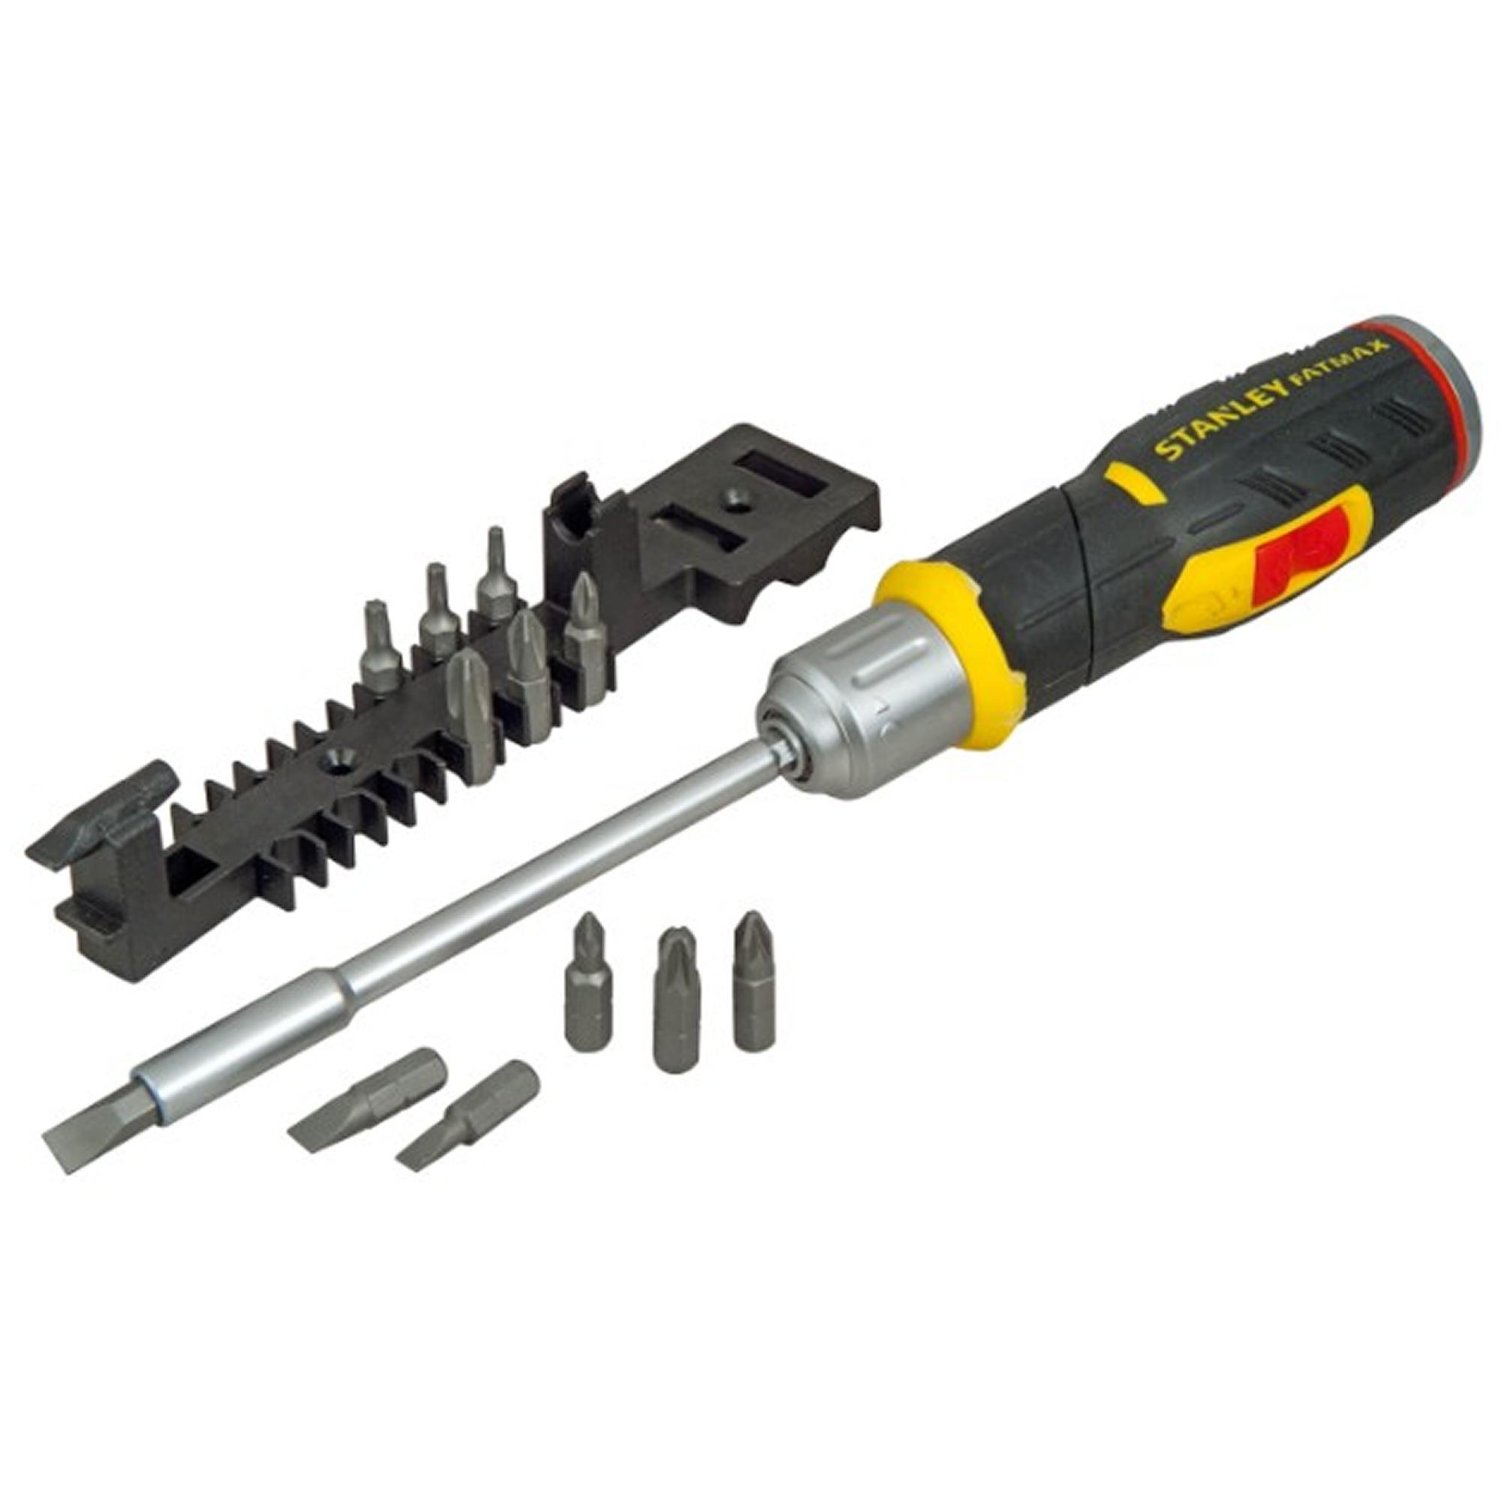 Stanley FATMAX screwdriver with ratchet and 12 bits set (FMHT0-62691)